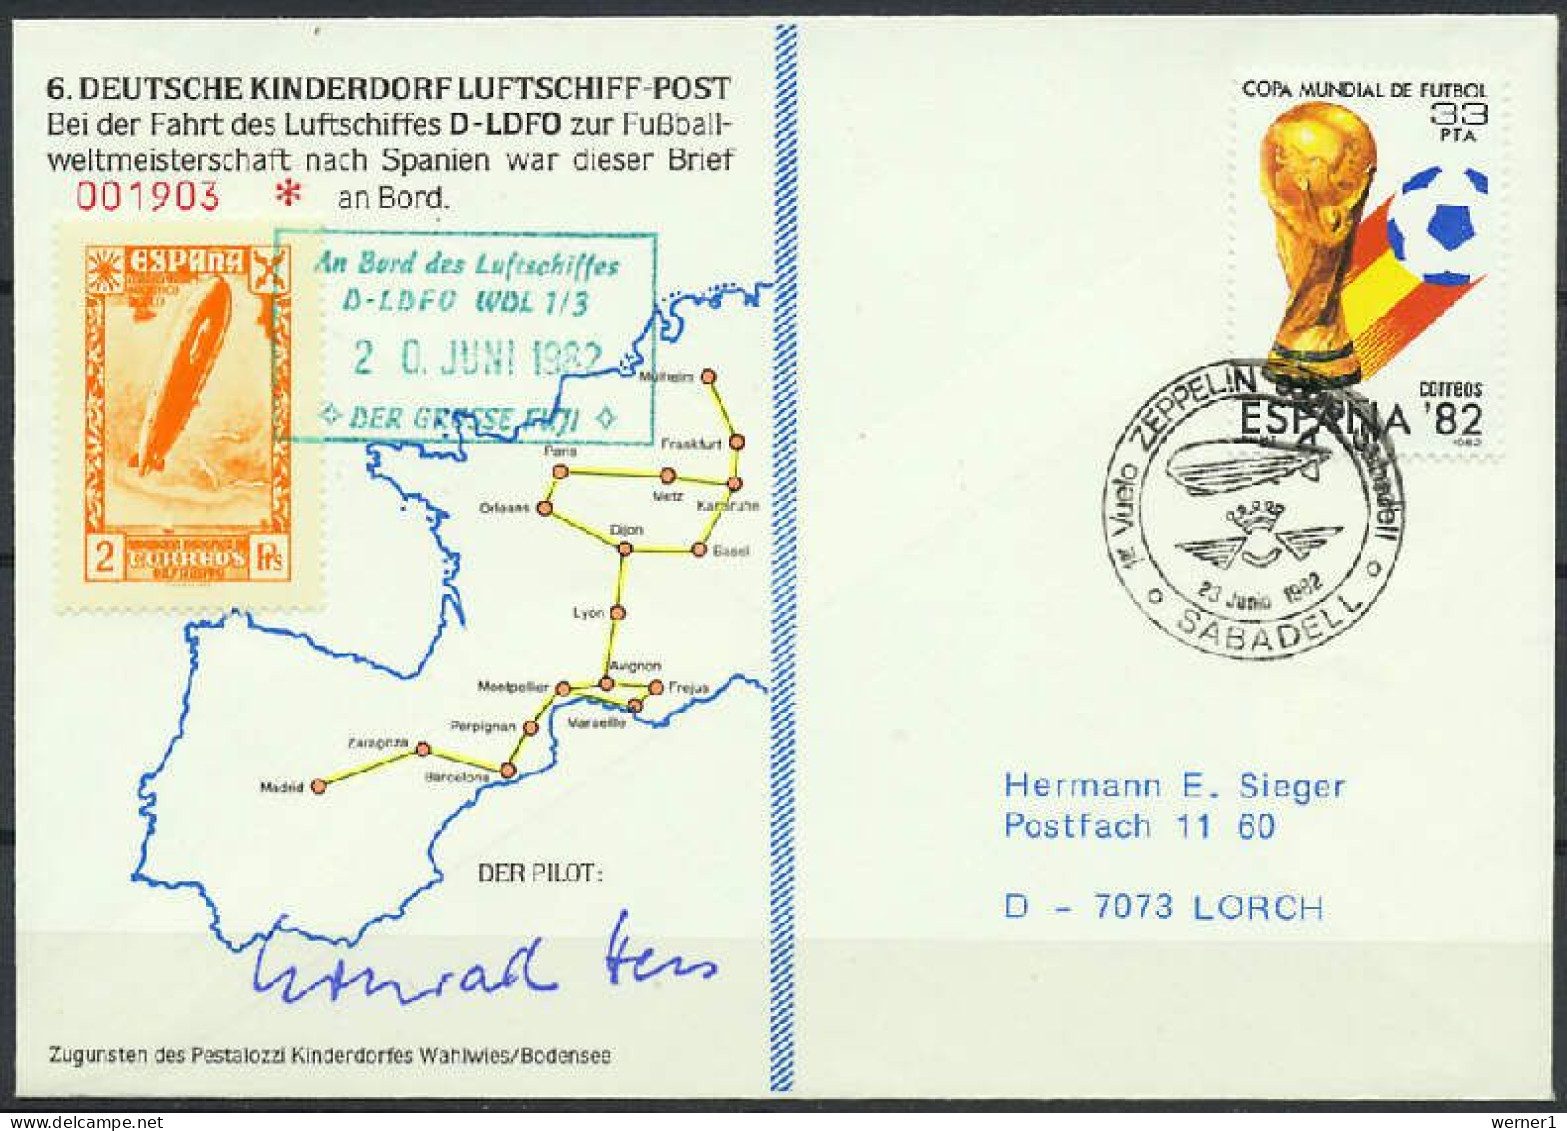 Spain 1982 Football Soccer World Cup, Zeppelin Flight Cover Carried On Bord Airship D-LDFO "Der Grosse Fuji" - 1982 – Spain